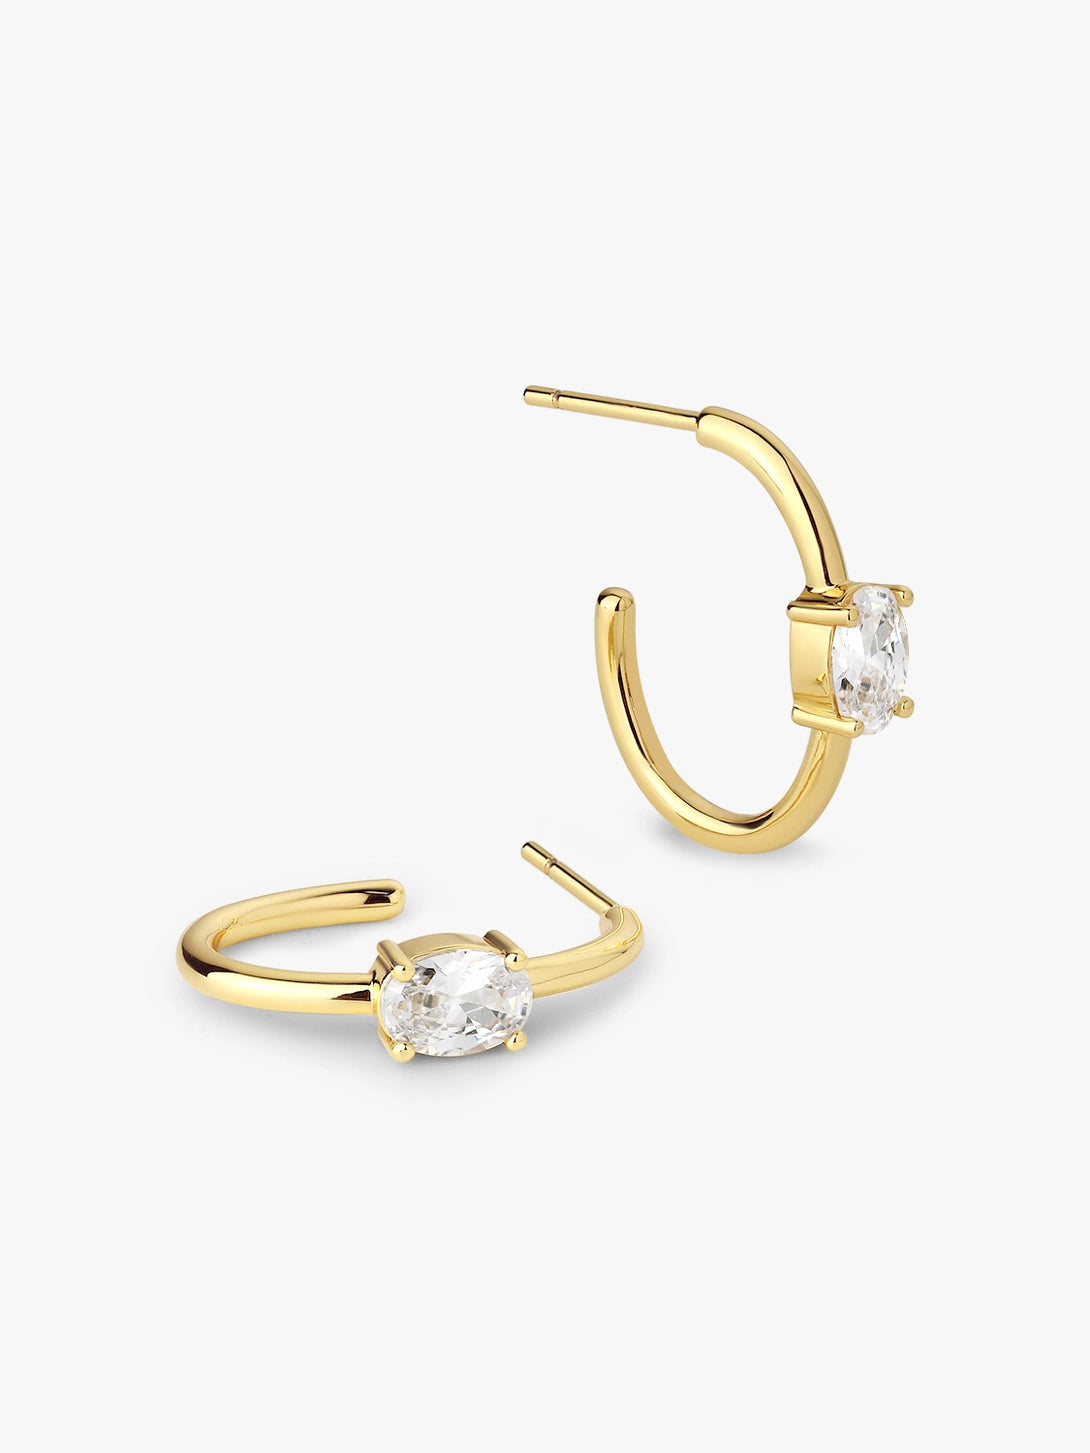 Delicate Oval Solitaire Thin Hoop Earrings - OOTDY